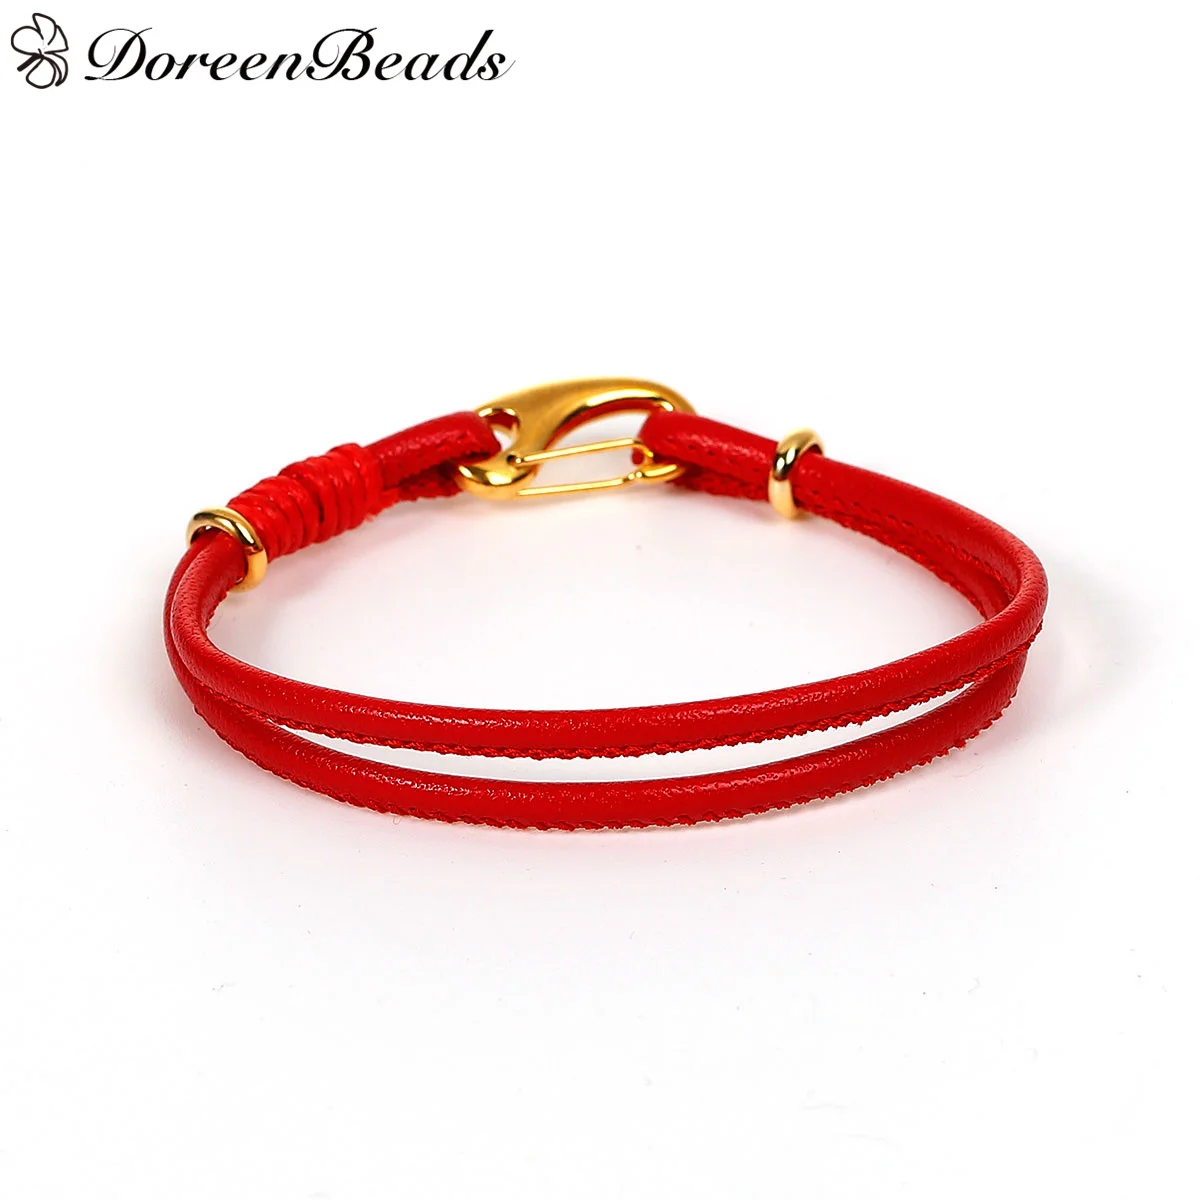 DoreenBeads PU Leather European Style Double Layer Charm Bracelets Red Cord gold color Clasp 19.5cm(7 5/8") long, 2 PCs